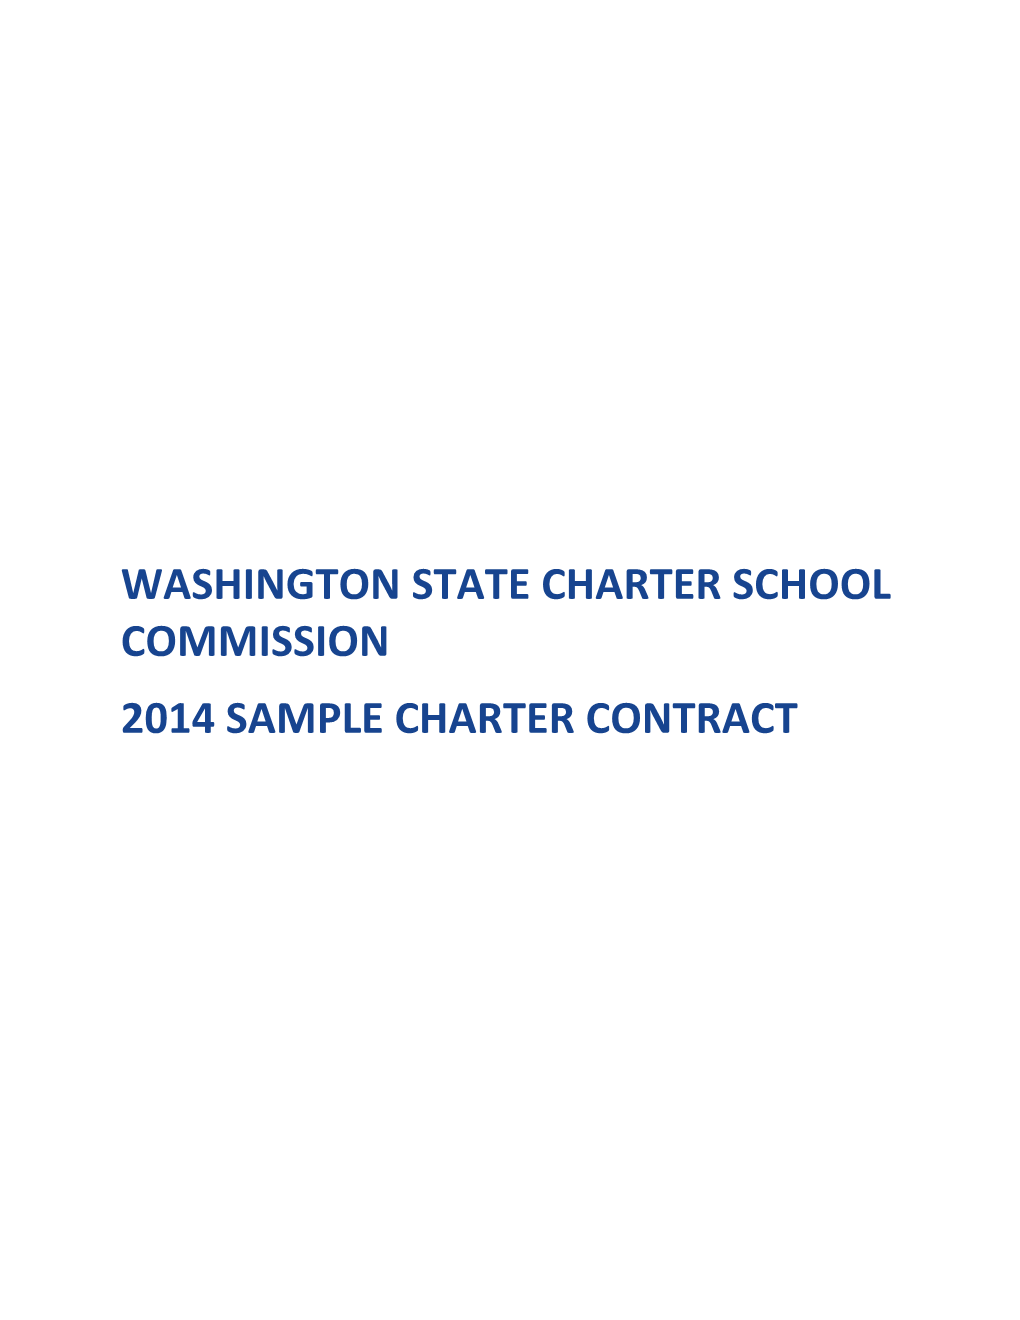 Washington State Charter School Commission: 2014 Sample Charter Contract